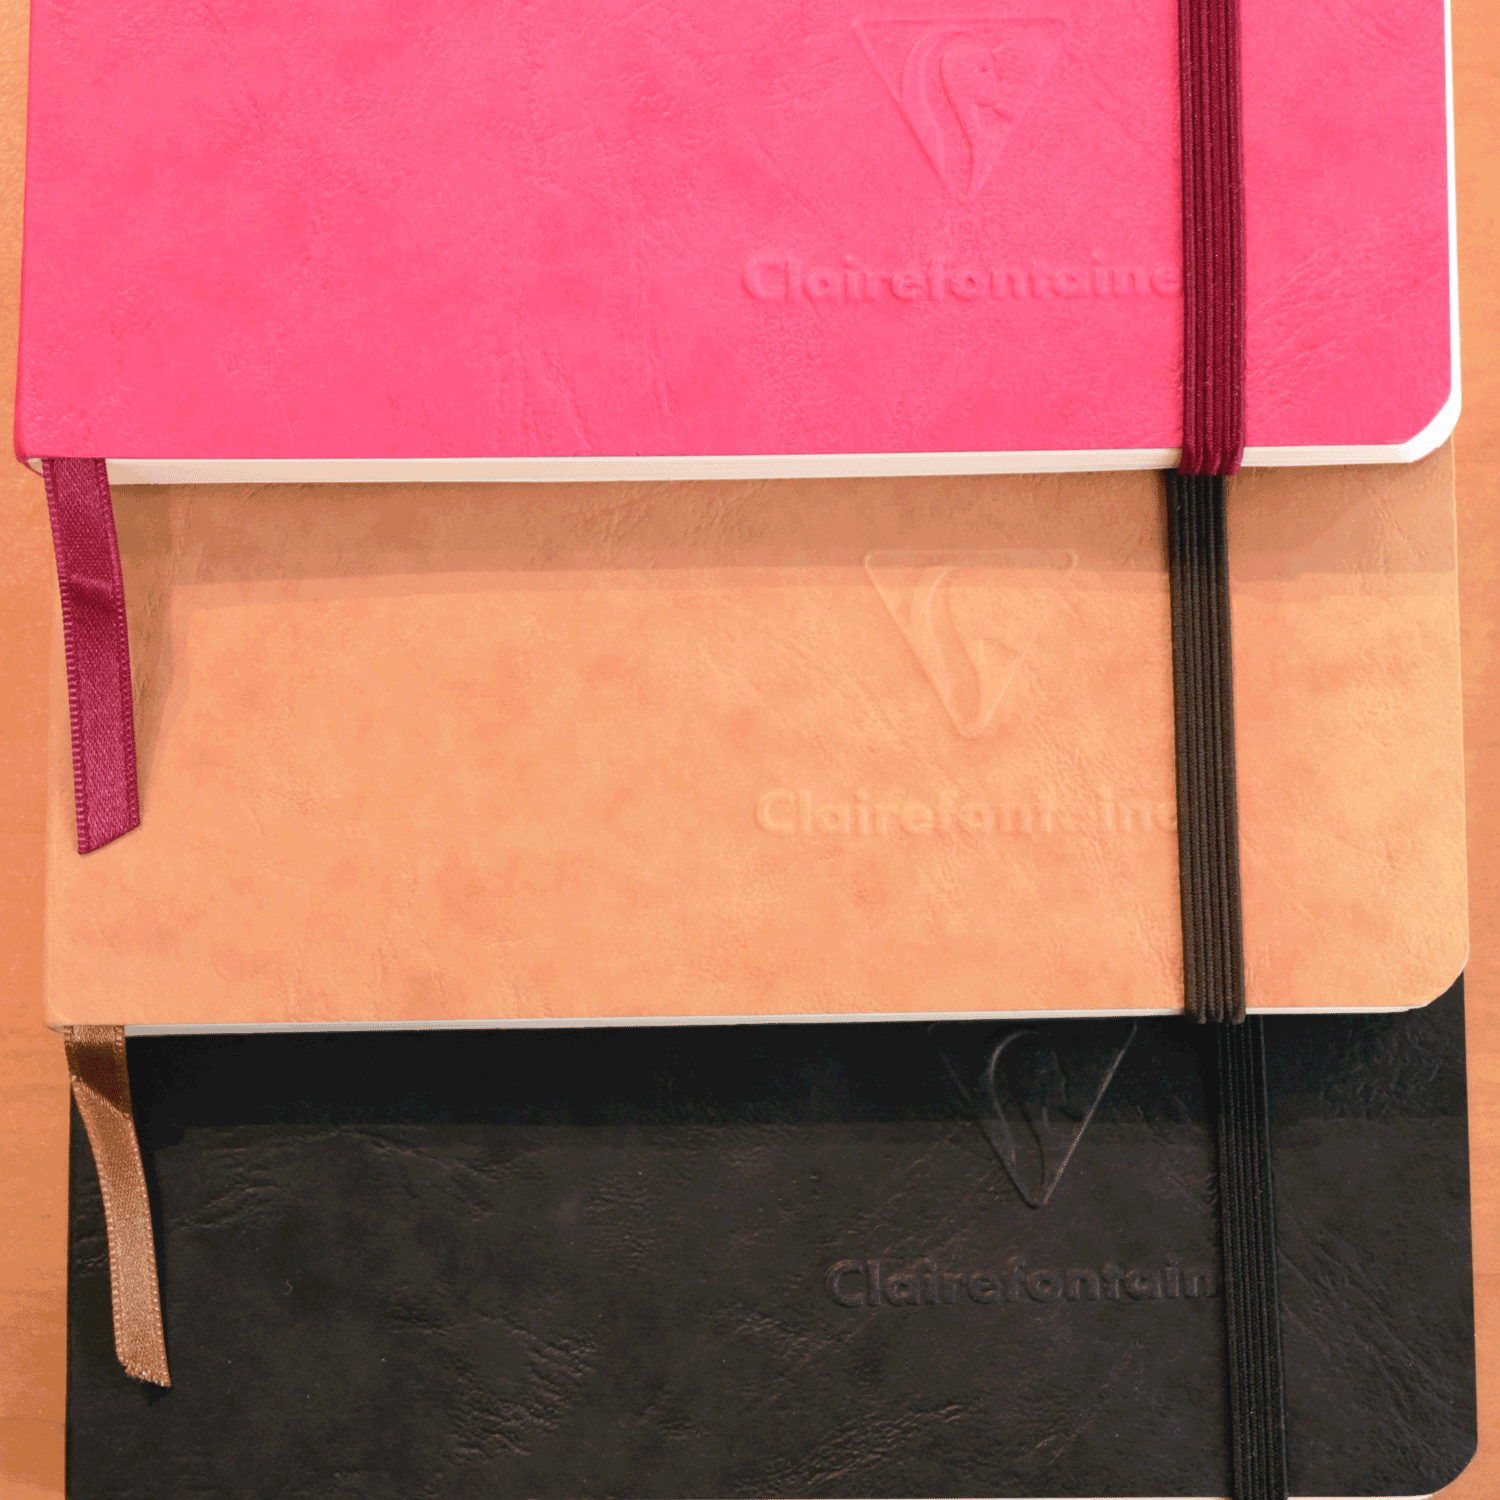 Clairfontaine Stationery